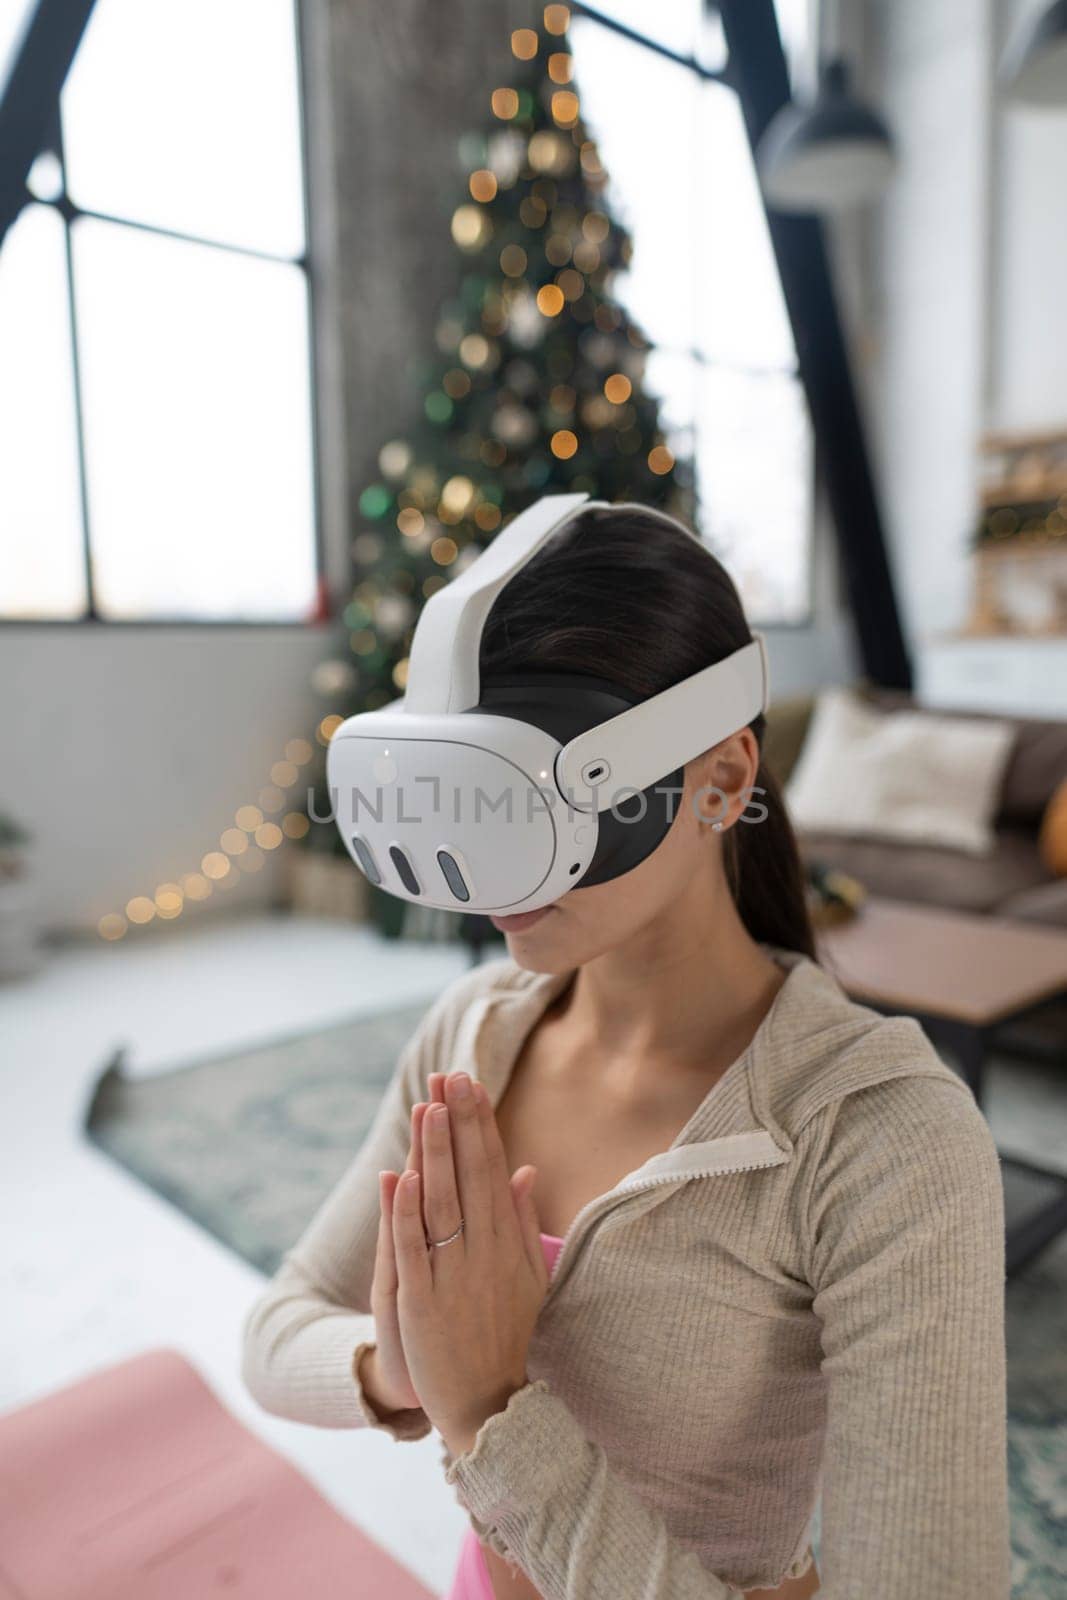 Using a virtual reality headset, a young lady in pink sportswear practices yoga near a Christmas tree. by teksomolika